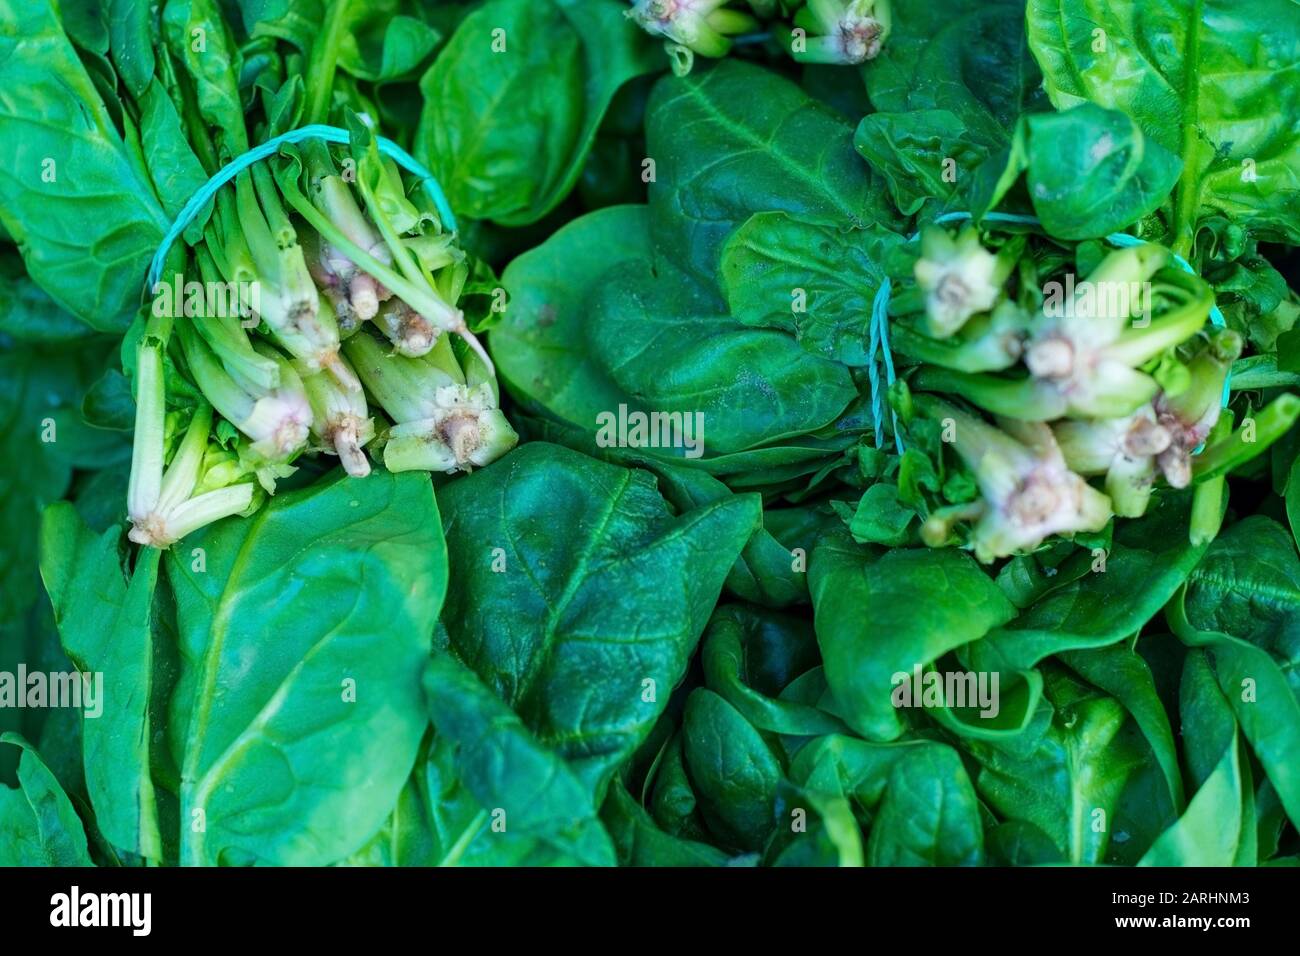 fresh green leaves spinach or pak choi Close-up Fresh Casting Spinach Zi By The Counter Of A Store. Healthy and natural vegetarian food. Vitamin Salad Stock Photo